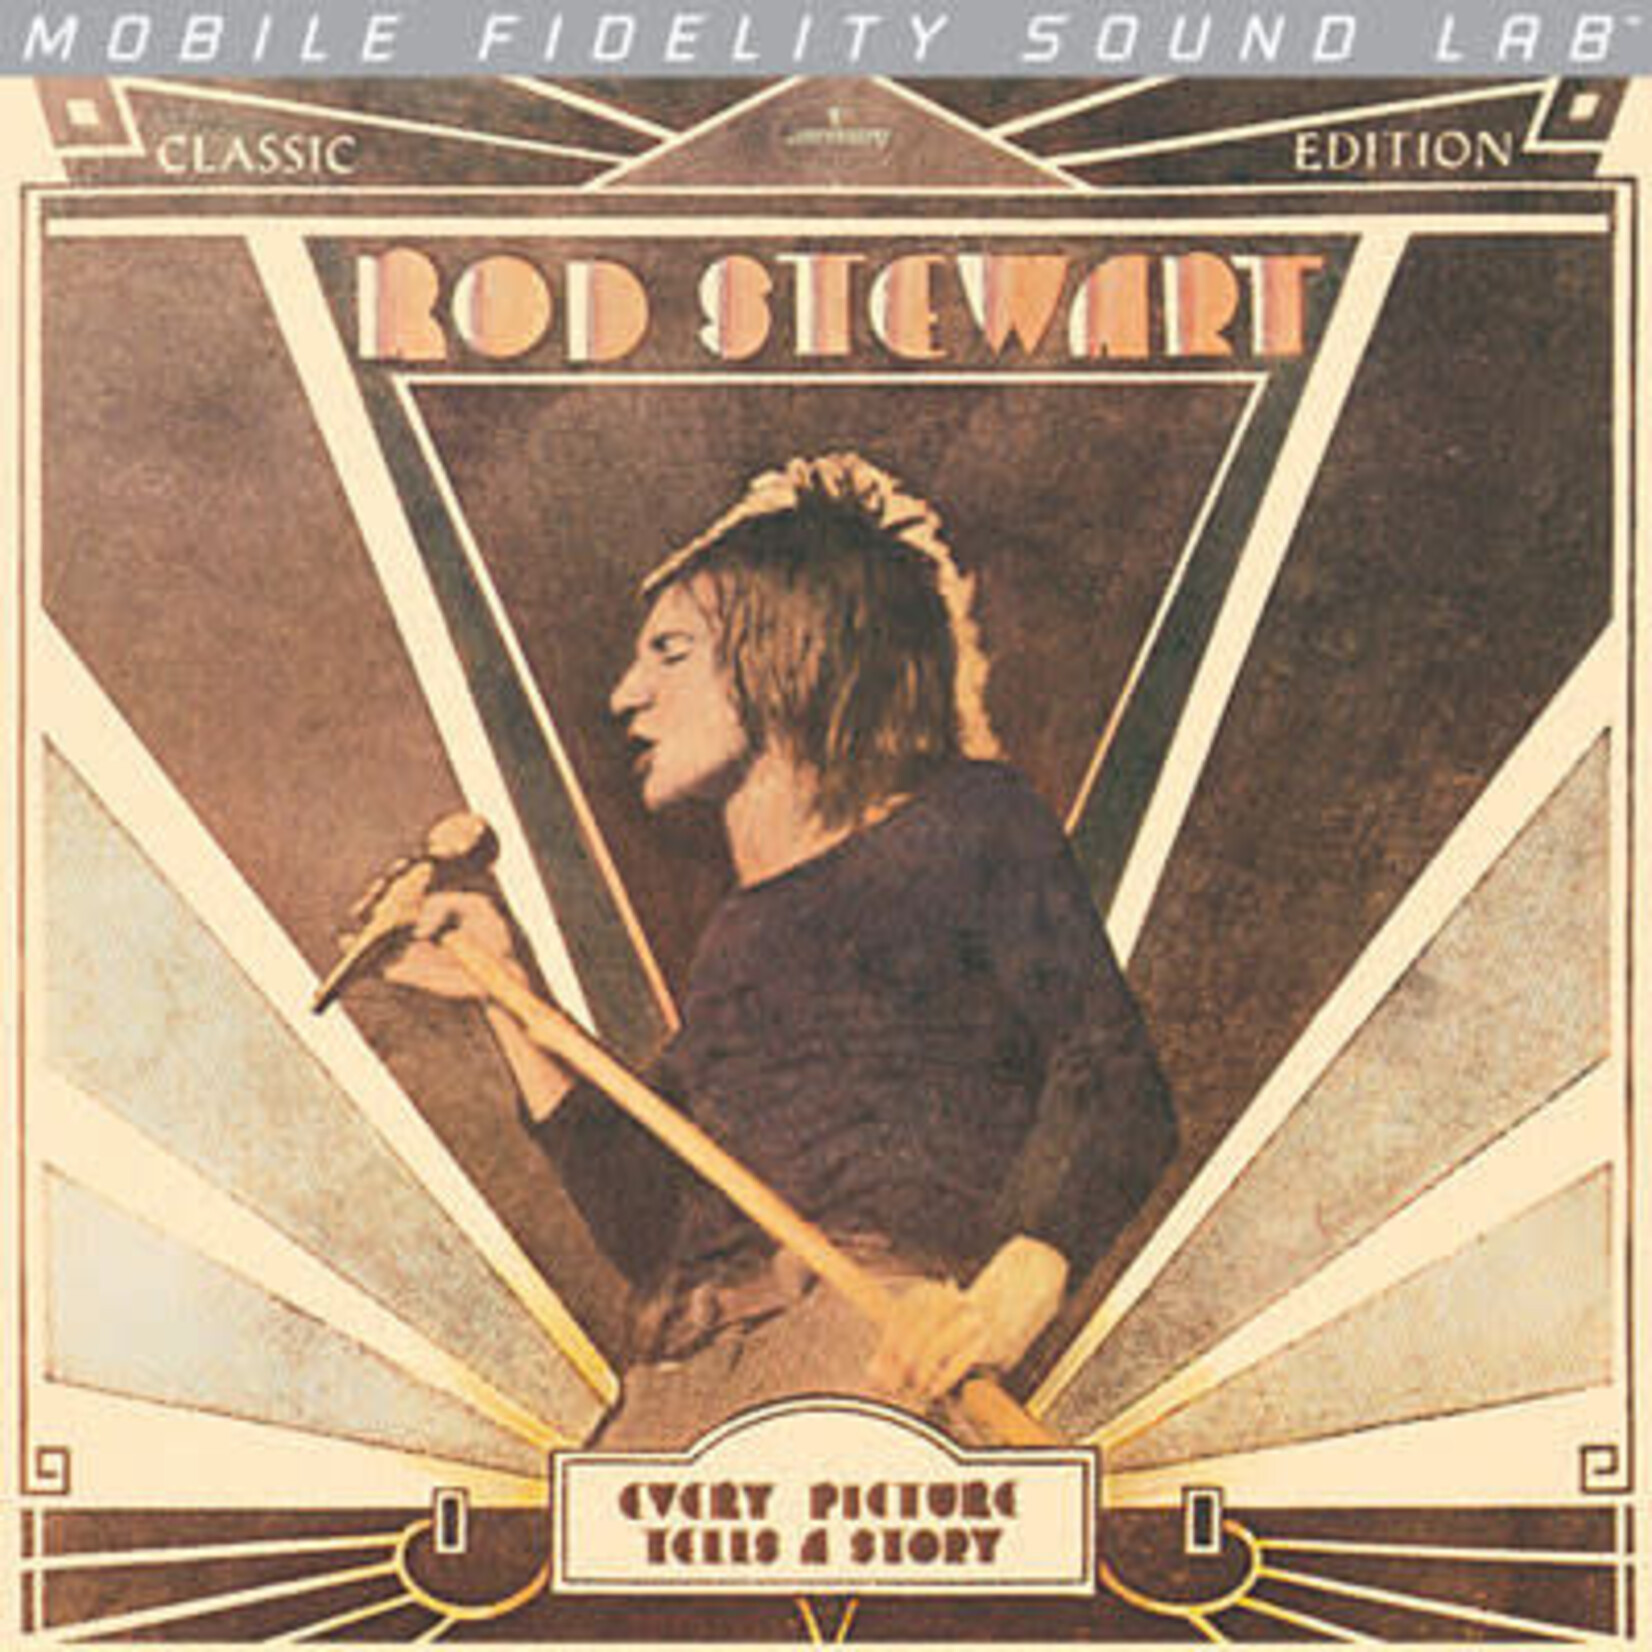 Stewart, Rod: Every Picture Tells a Story (2011 Mobile Fidelity, Audiophile) [KOLLECTIBLES]